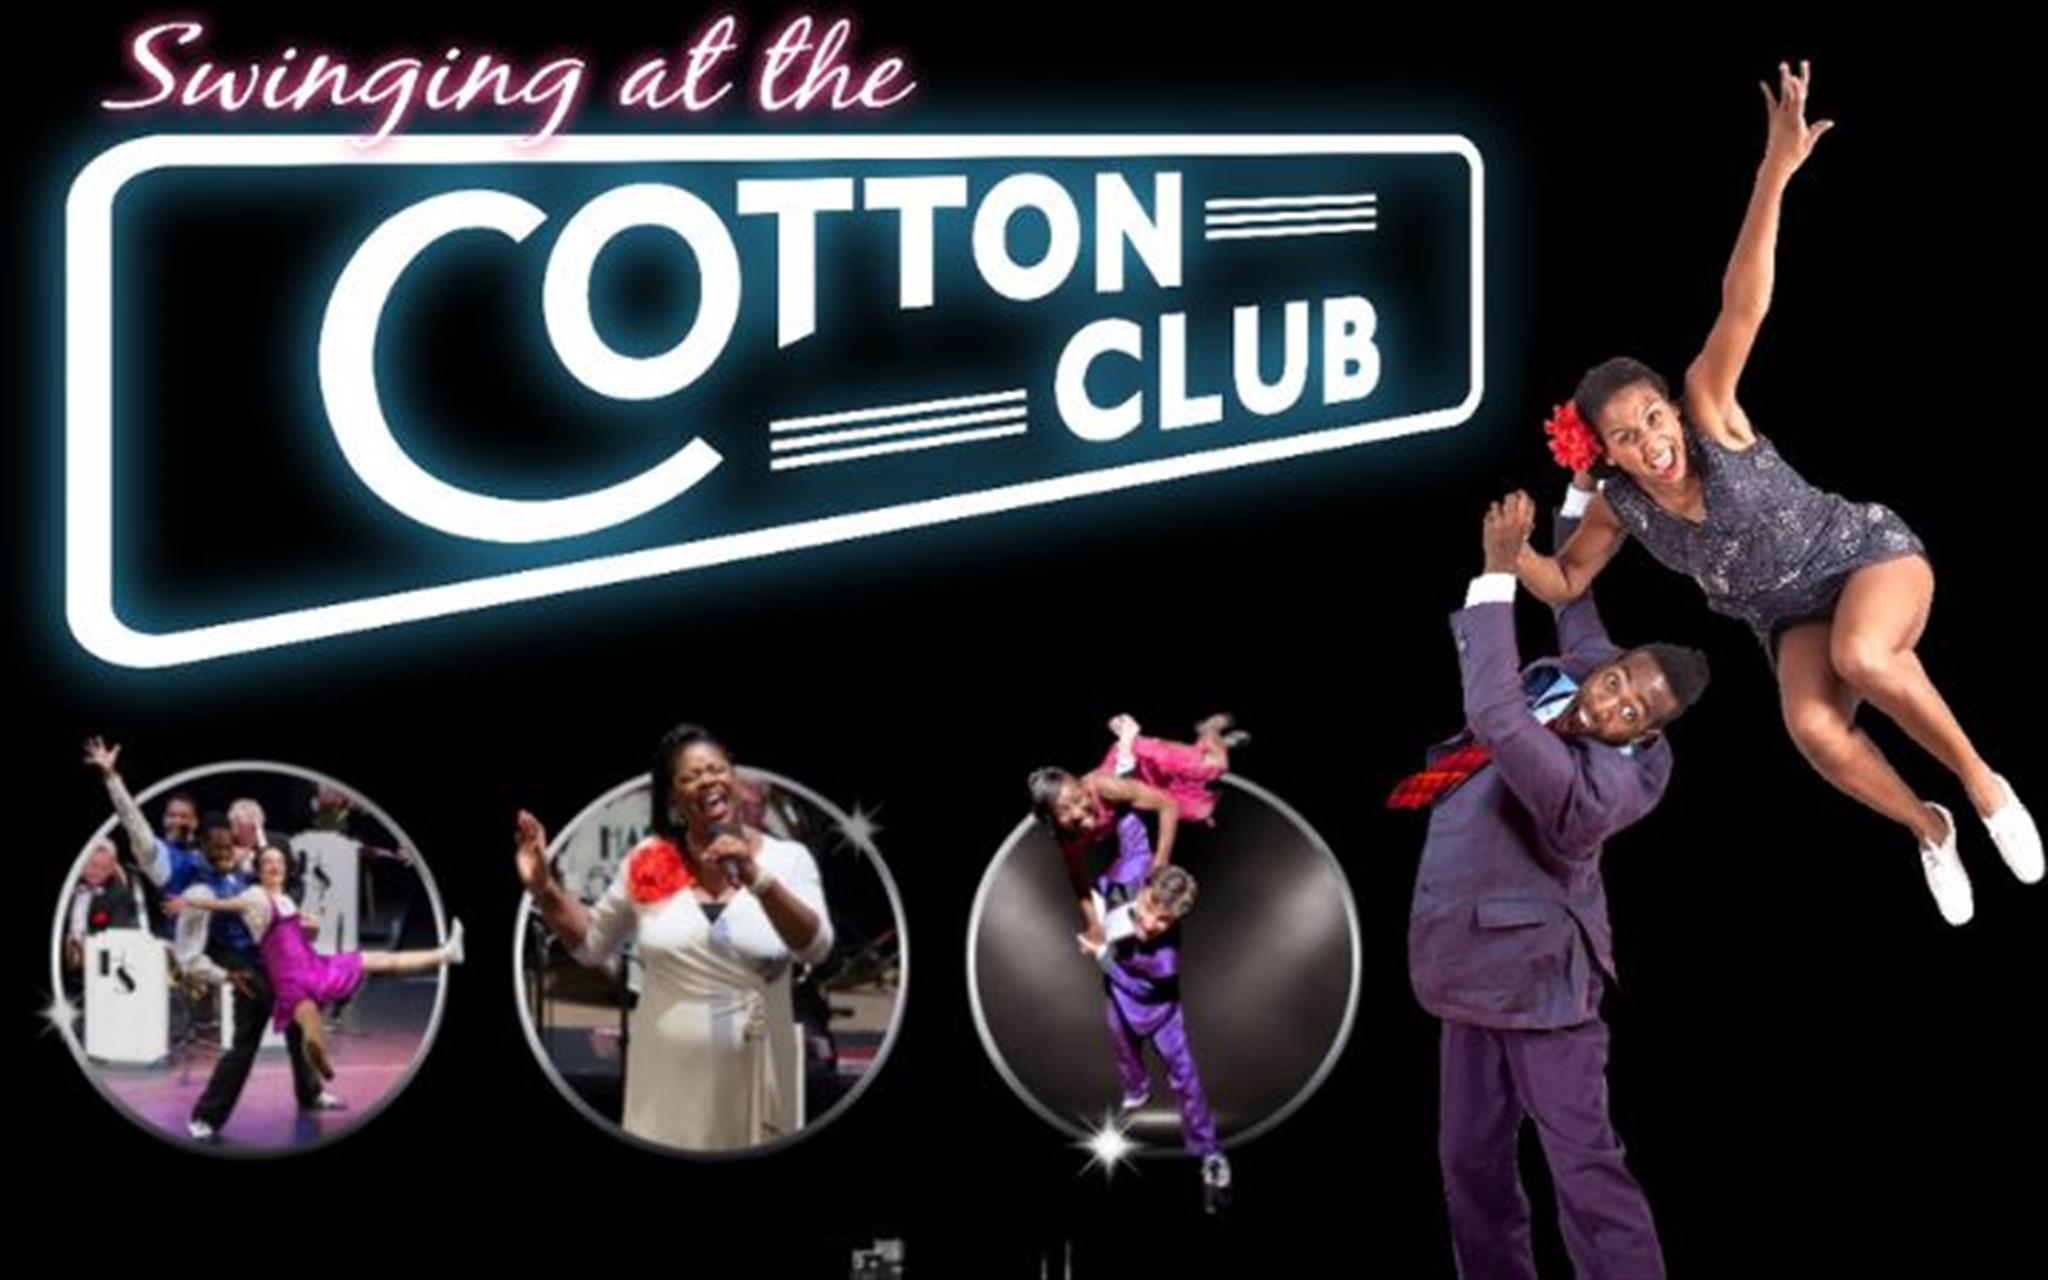 Swinging at the Cotton Club image